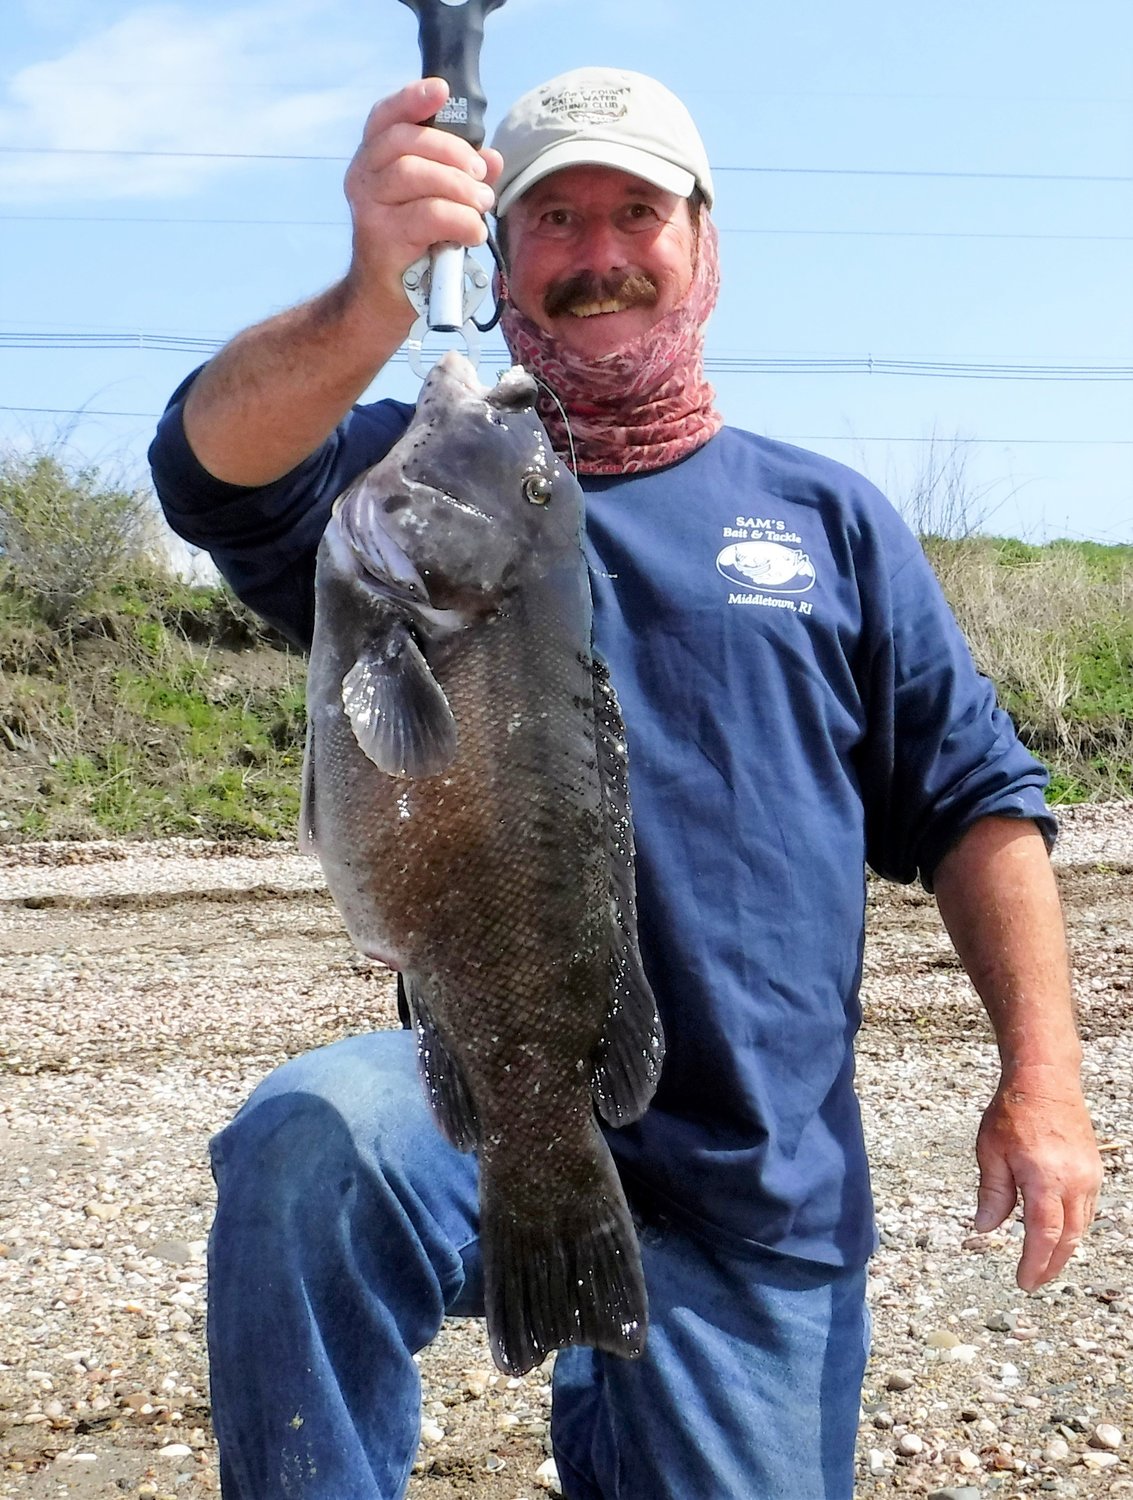 Patience pays off: John Migliori caught this 23”, 10 pound tautog fishing off Aquidneck Island. He has been targeting tautog since the season opened on April 1.